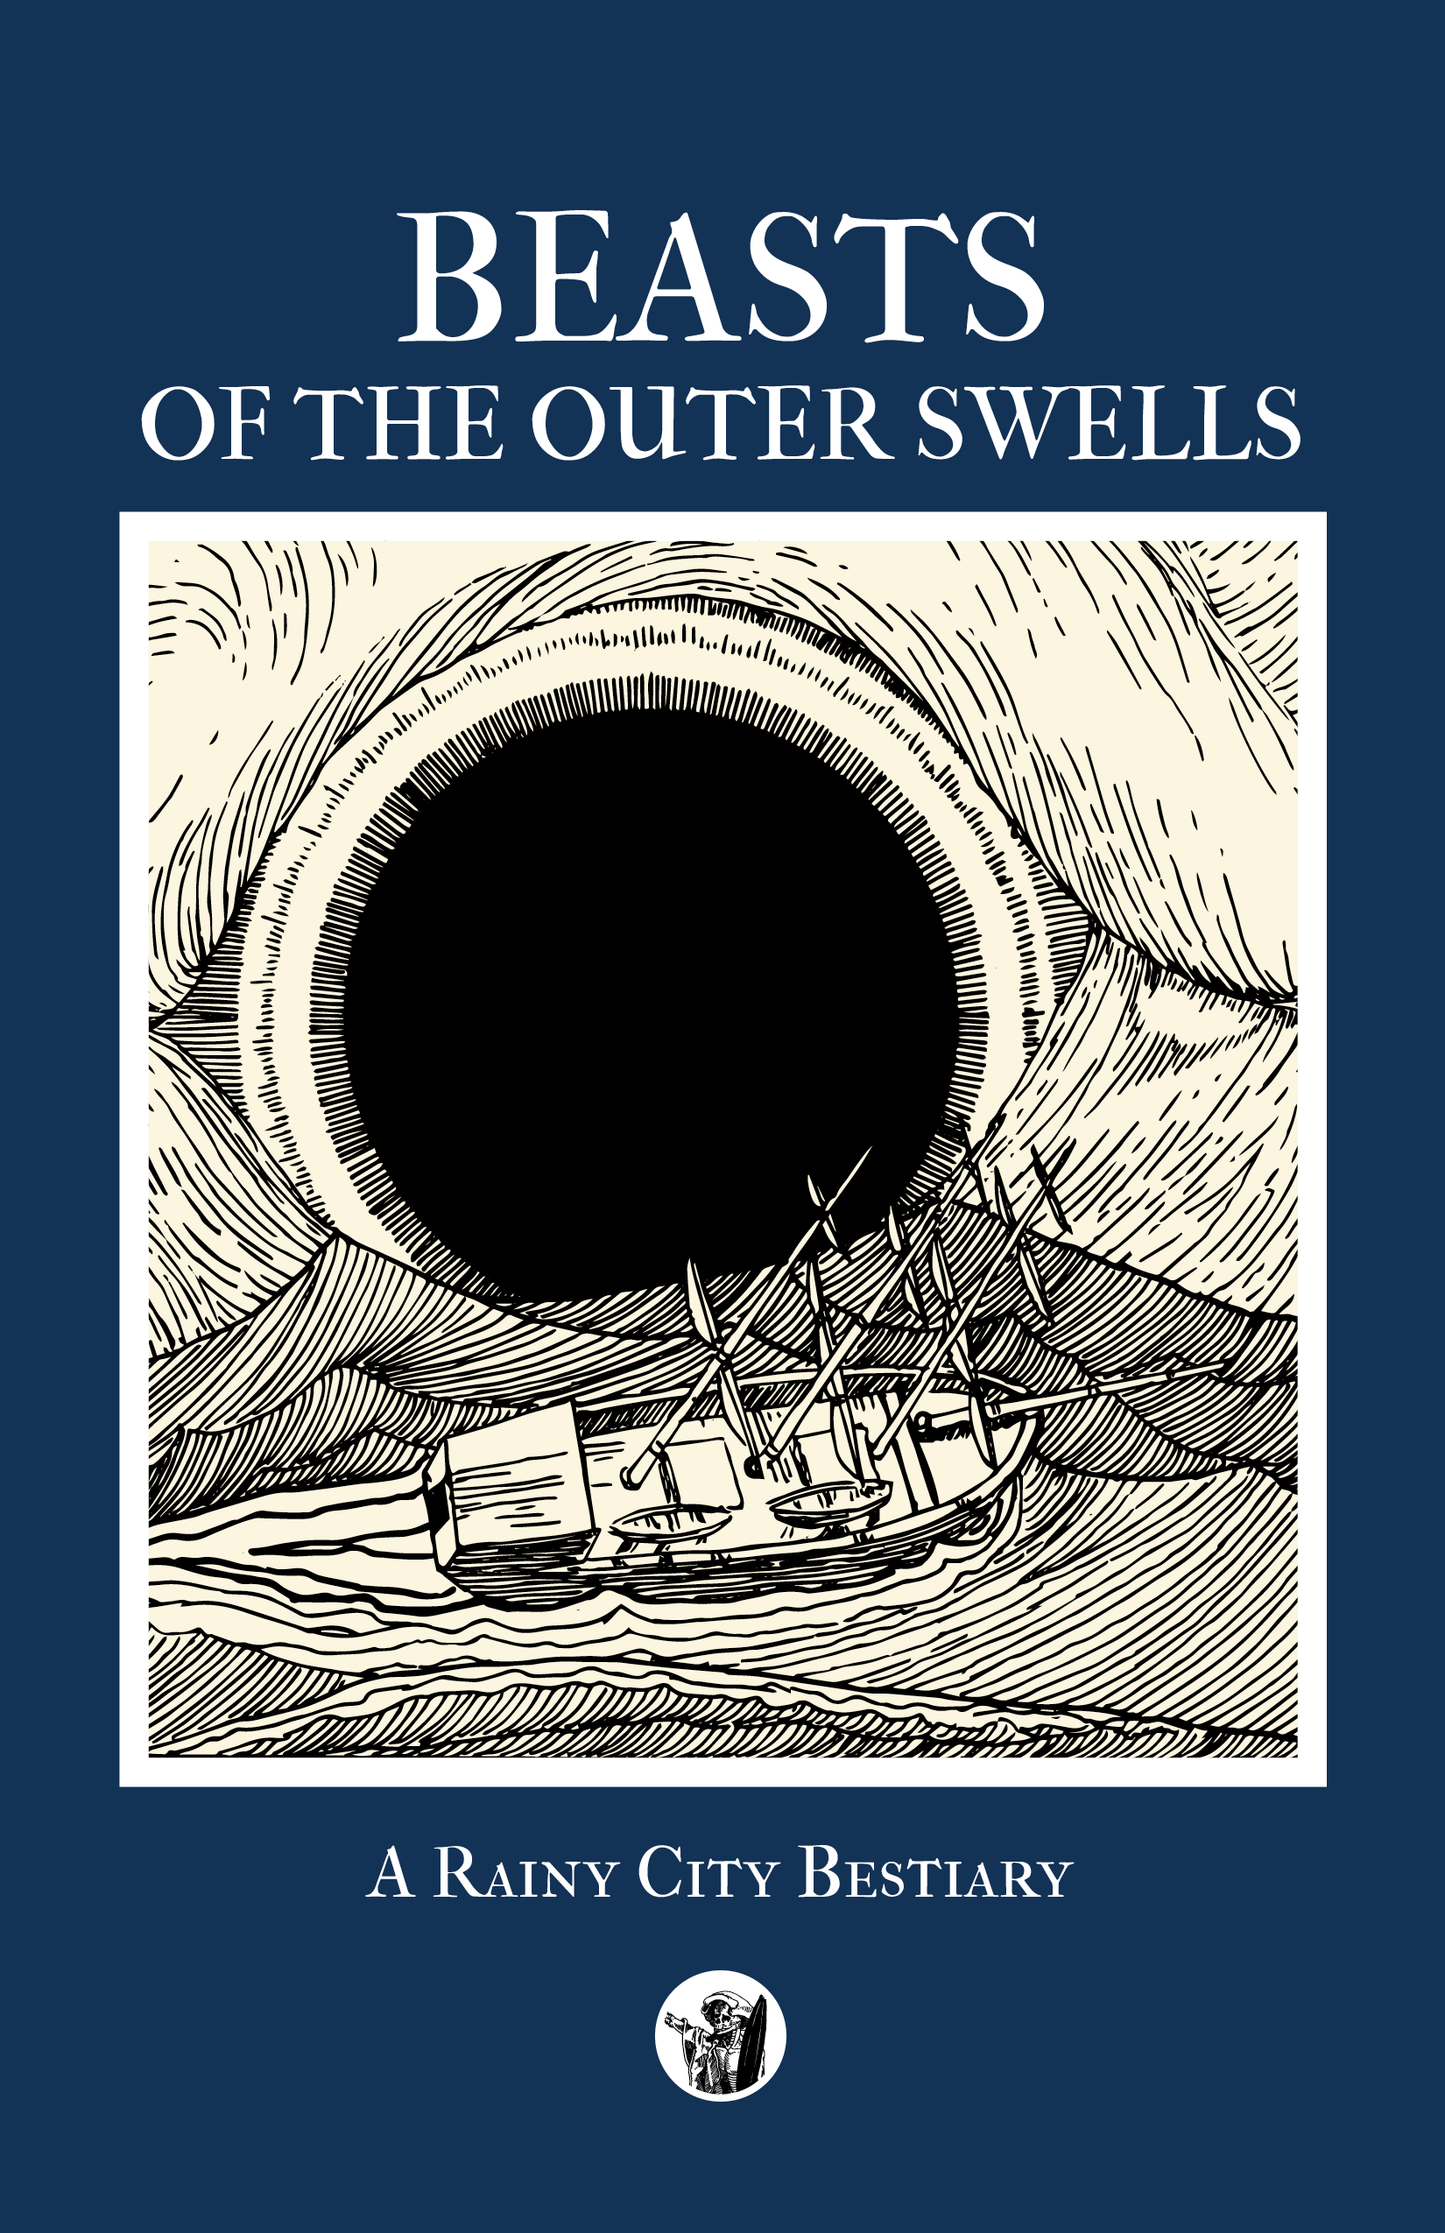 BEASTS OF THE OUTER SWELLS